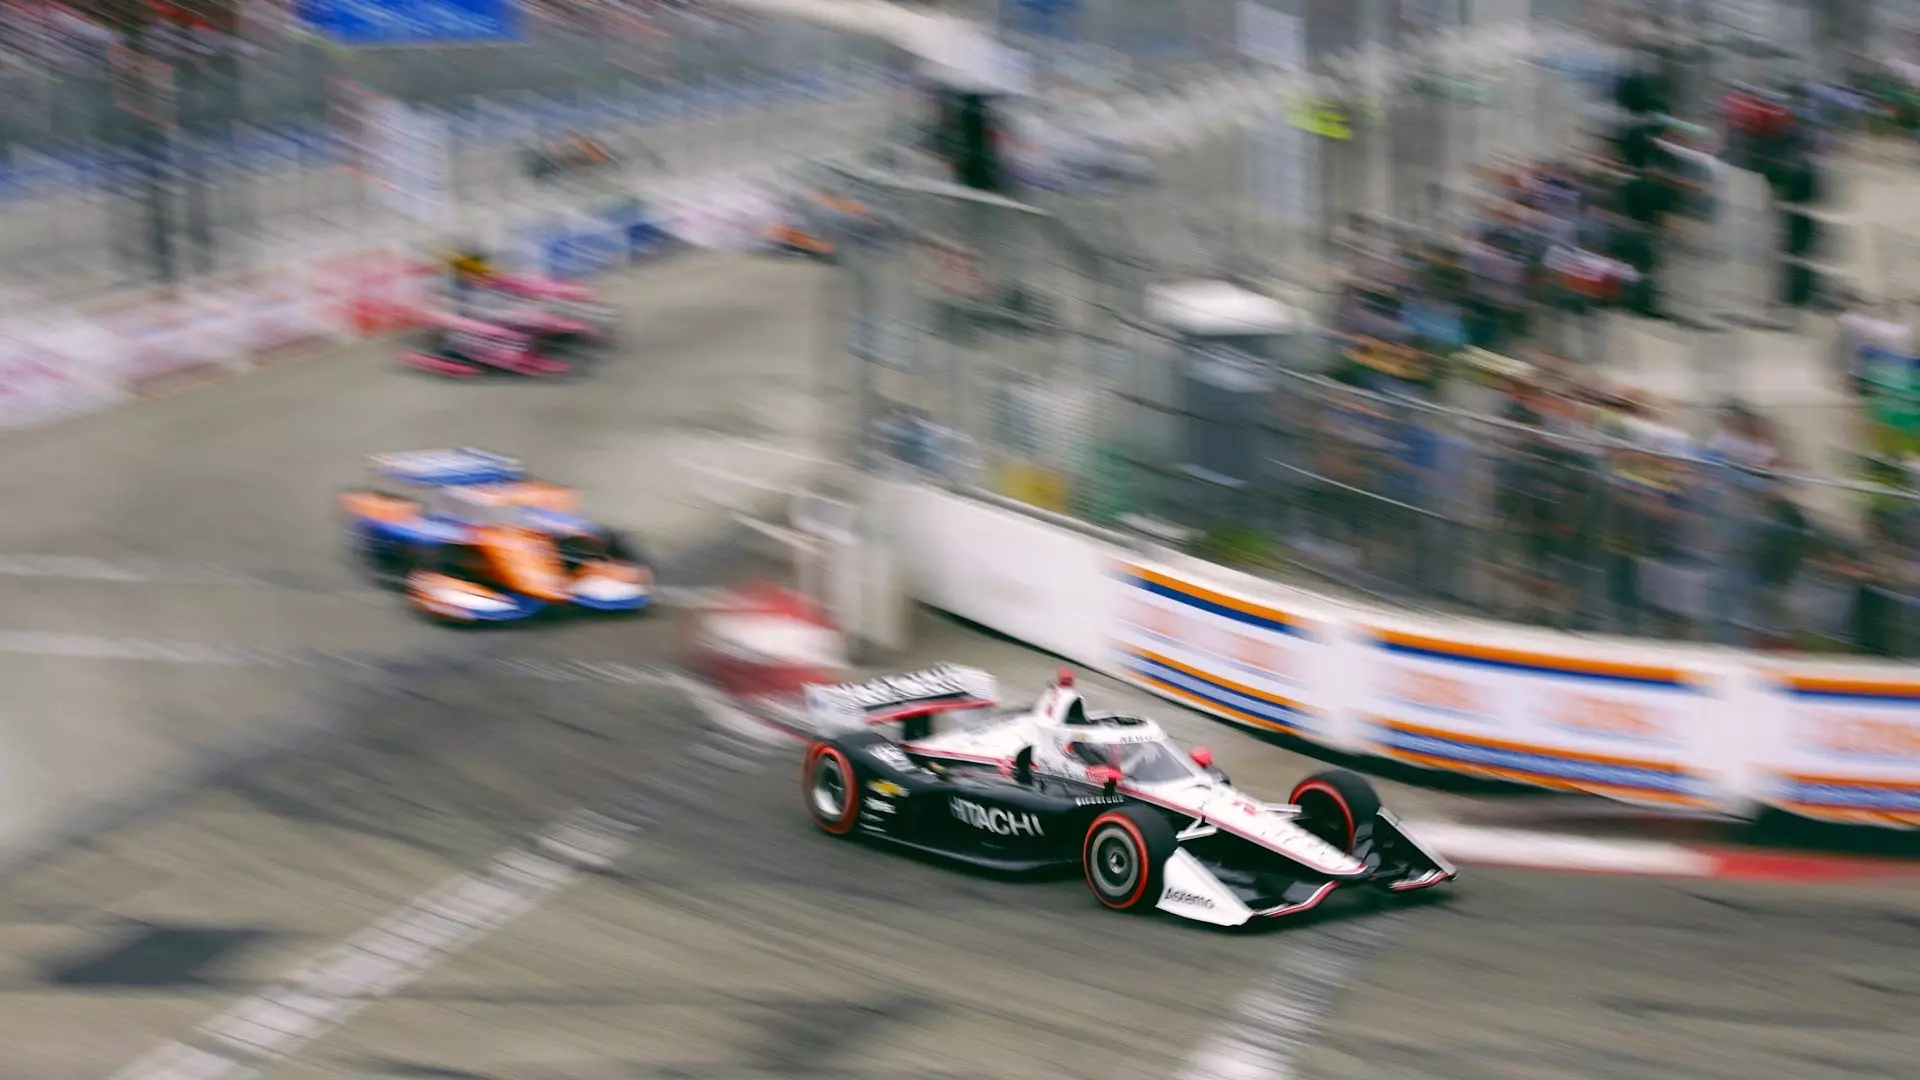 An IndyCar in Motion Turns This Photo Into a Long Beach Watercolor Painting